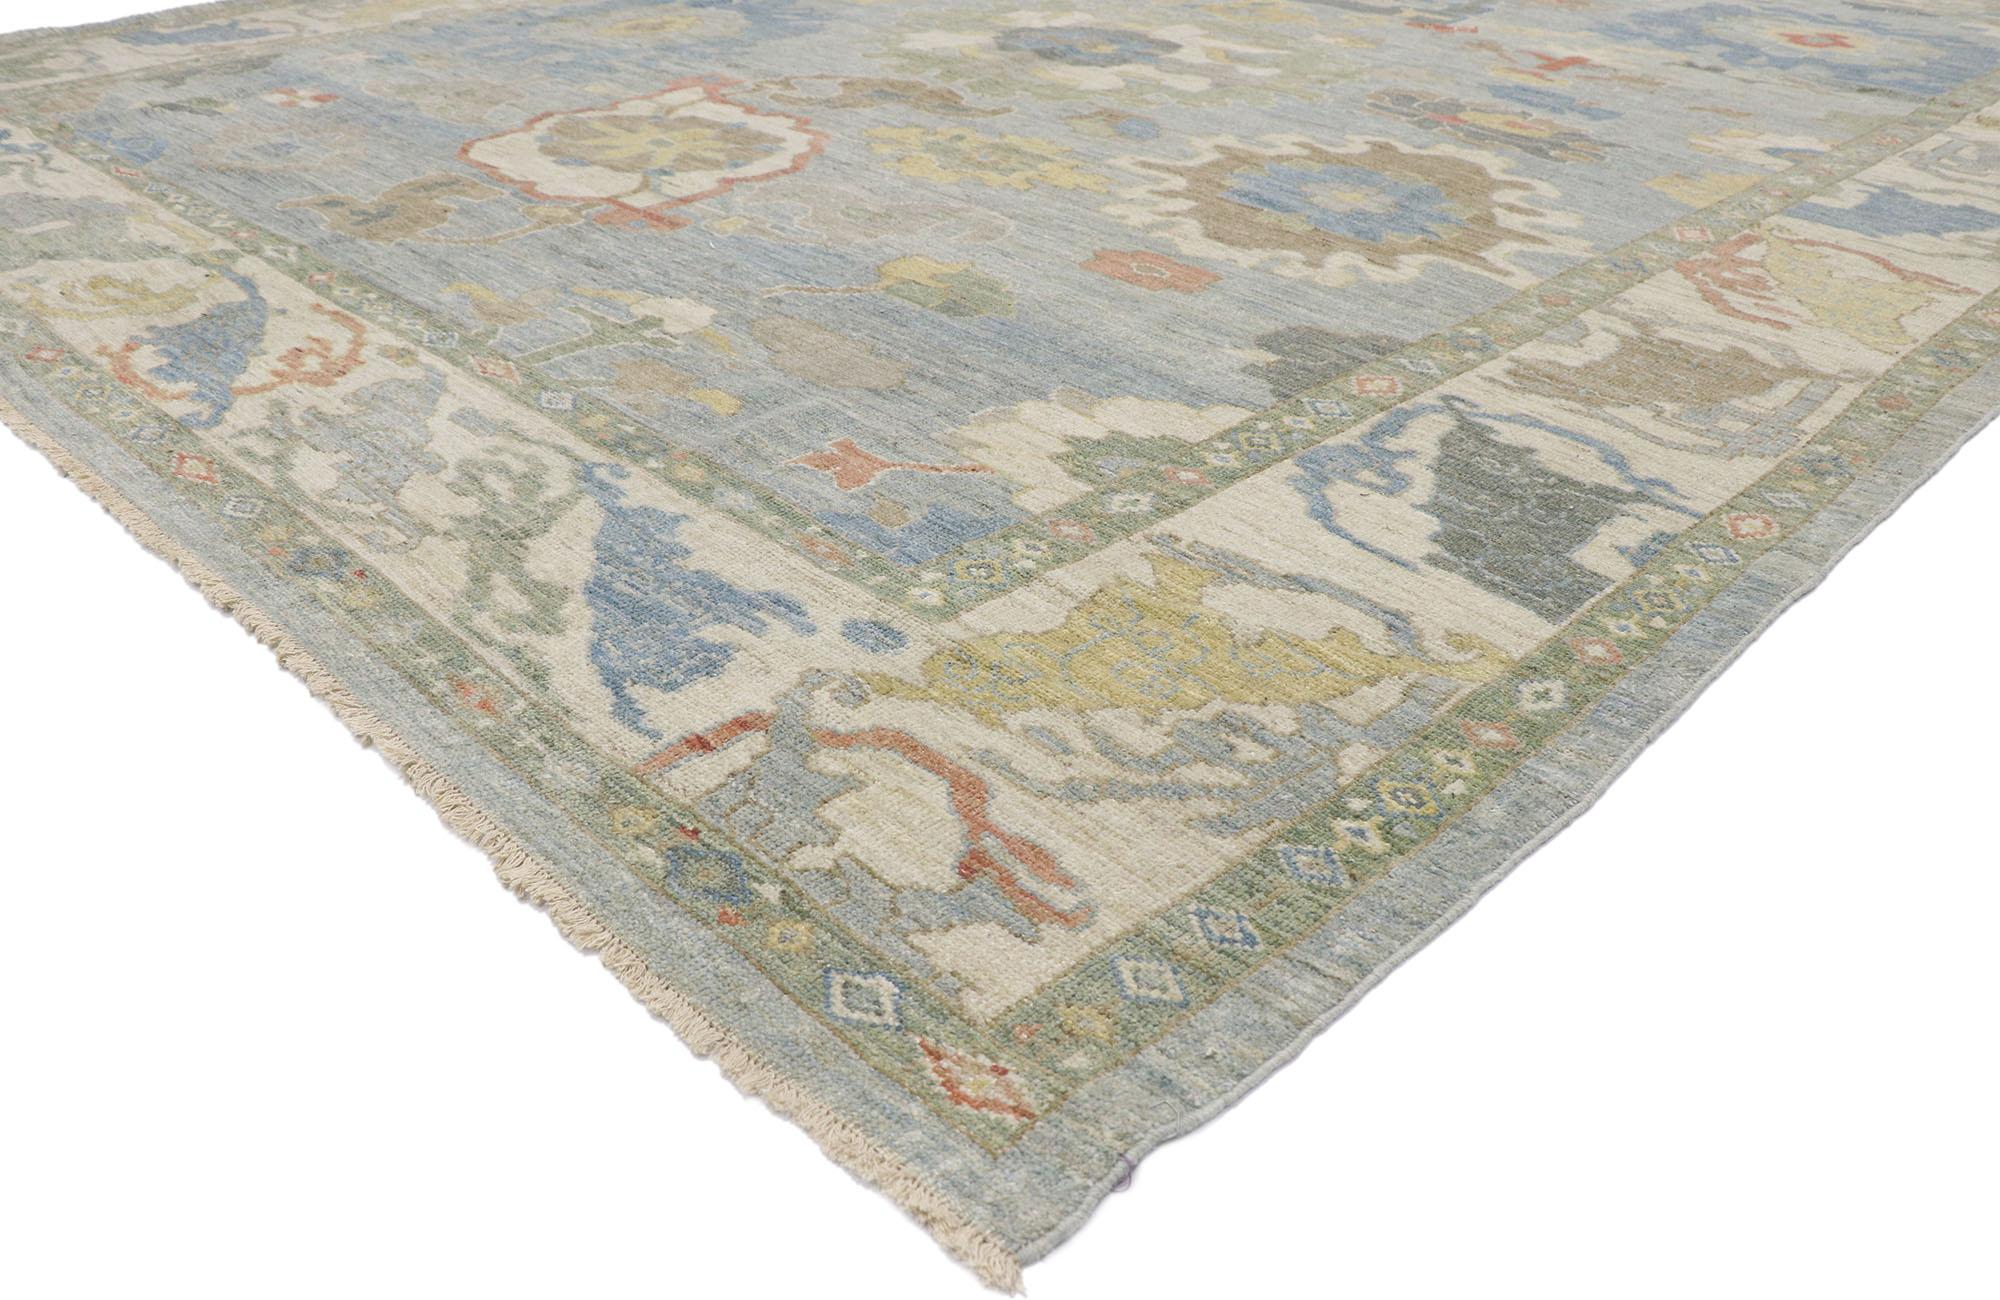 60862 New Contemporary Persian Sultanabad rug with Modern Coastal style 11'00 x 13'11. This hand-knotted wool contemporary Persian Sultanabad rug features an all-over botanical pattern spread across an abrashed bluish-grey field. An array of